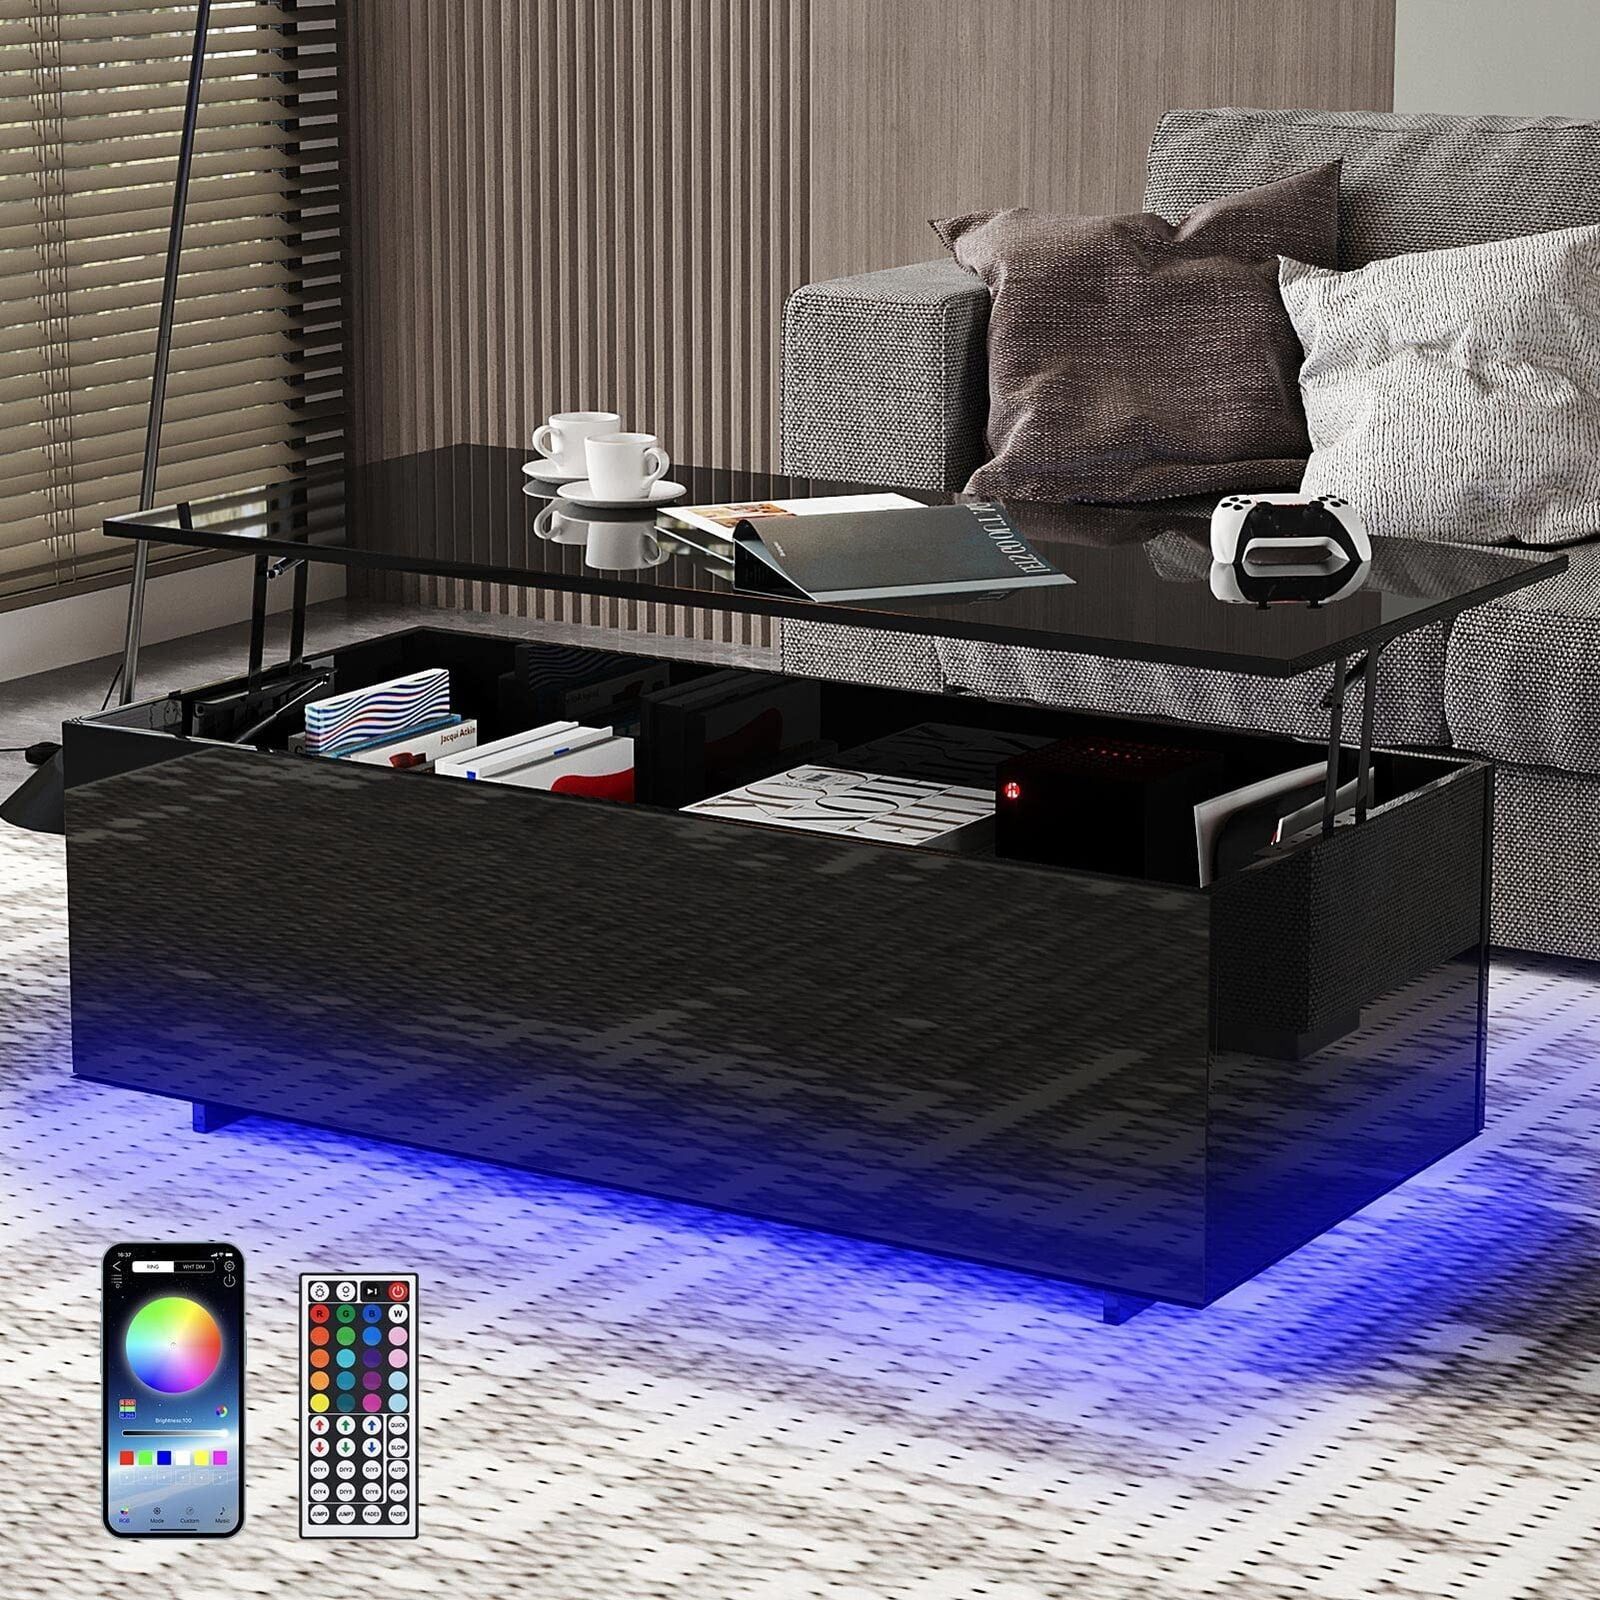 Shiyao 47inch Modern Led Coffee Tables Lift Top With Storage And Hidden  Compartment, High Glossy Coffee Tables With 20 Colors Led Light –  Walmart With Regard To High Gloss Lift Top Coffee Tables (View 14 of 15)